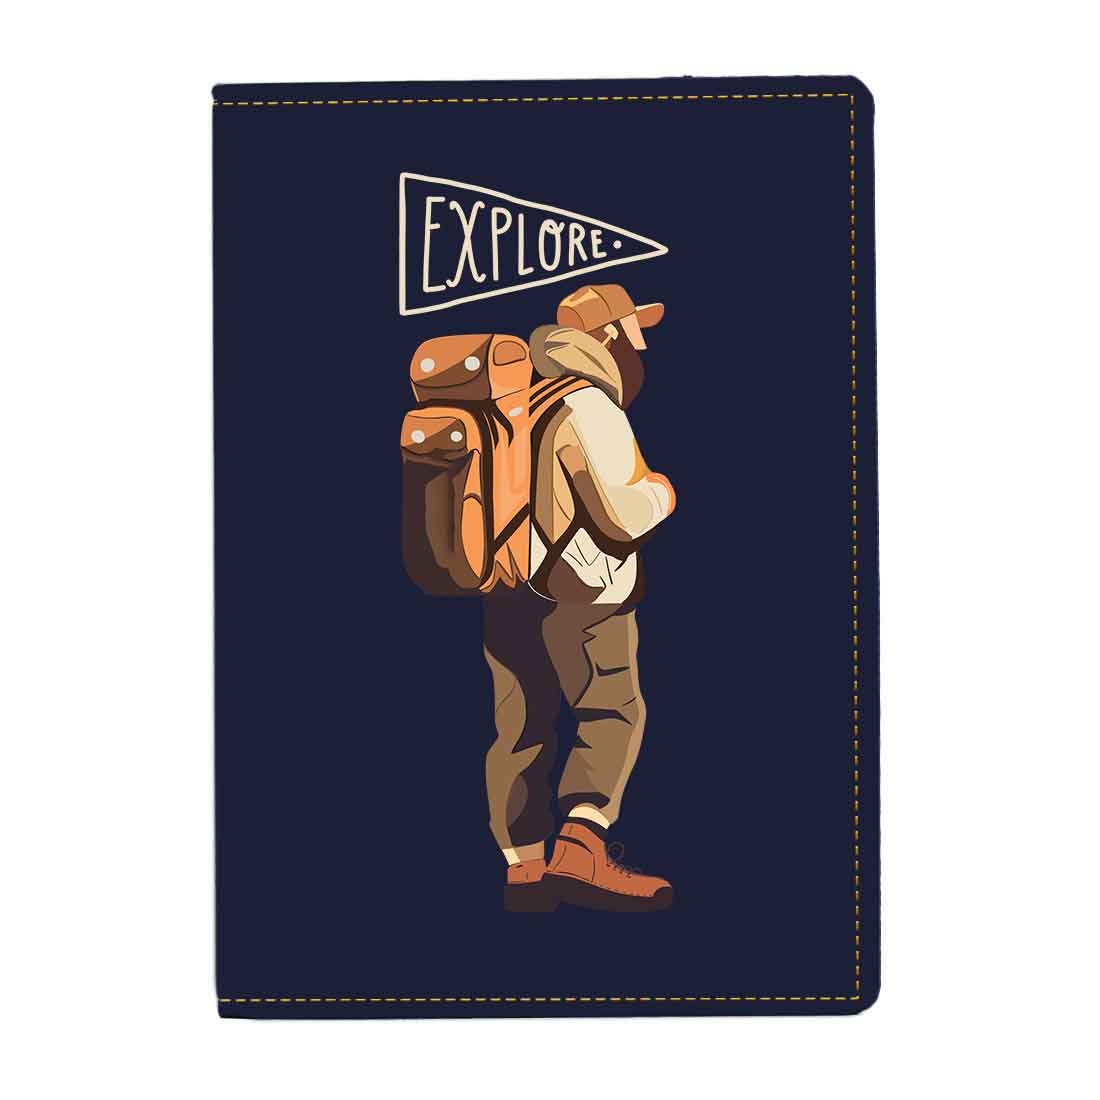 Personalised Passport Case PU Leather Custom Covers for Passports-Explore